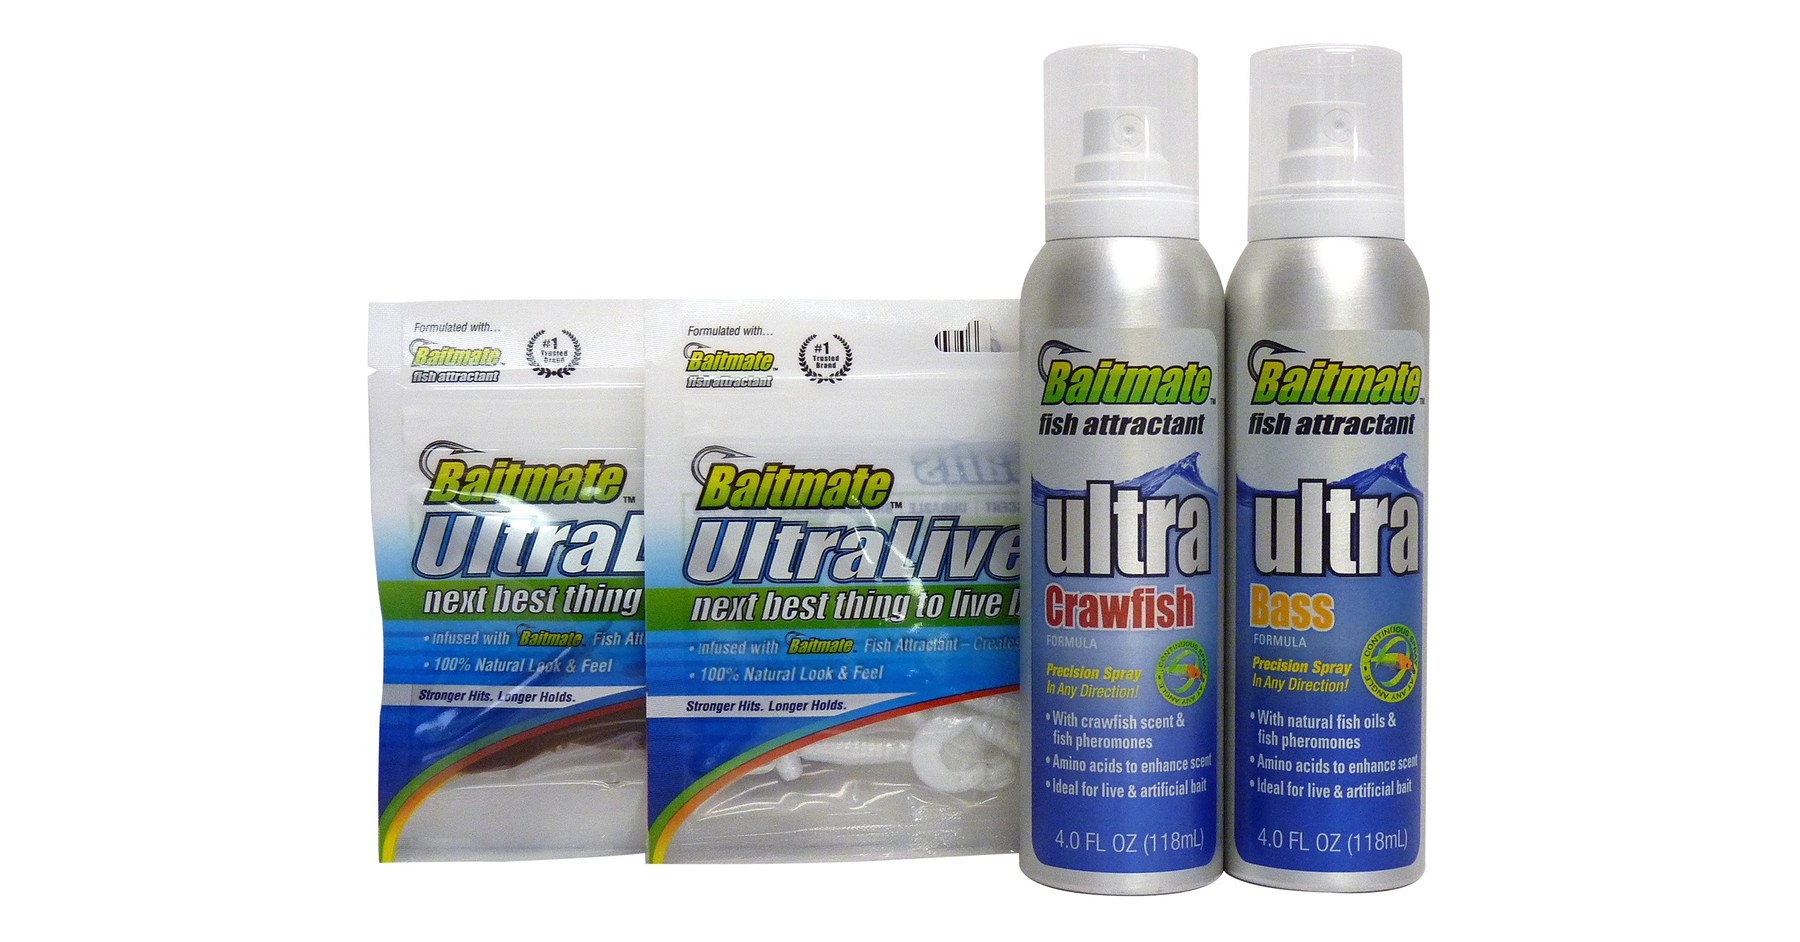 Baitmate™ Fish Attractant Releases New Bag-on-Valve Continuous Spray  Attractants and Innovative UltraLive Baits